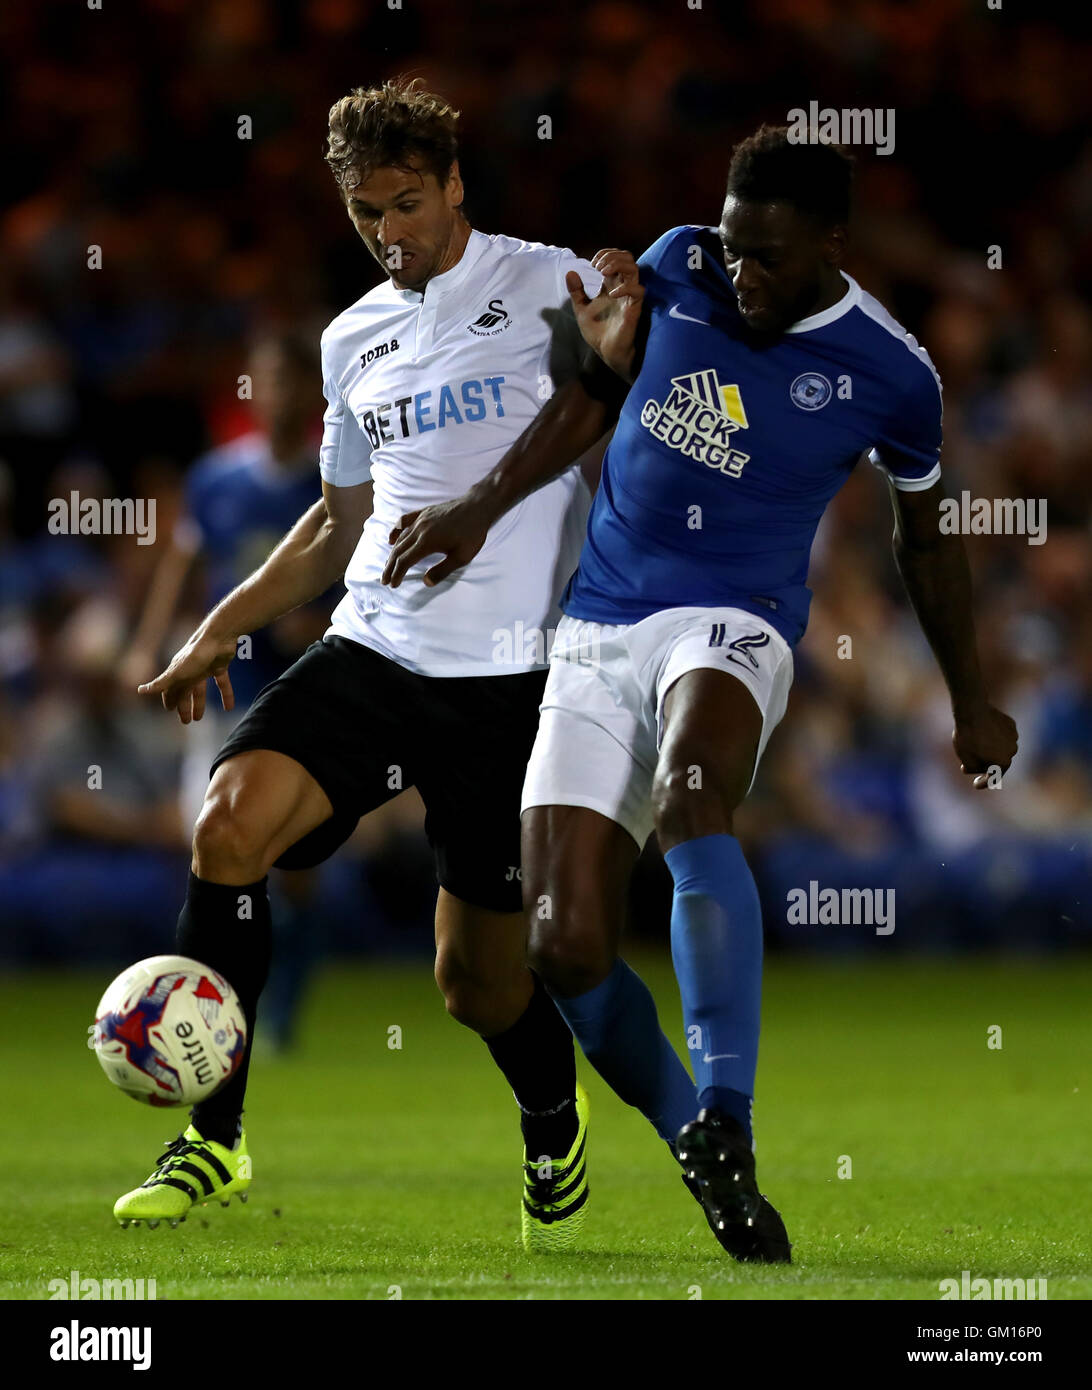 Swansea City's Federico Llorente (left) and Peterborough United's Ricardo Almeida Santos battle for the ball during the EFL Cup, Second Round match at the ABAX Stadium, Peterborough. Stock Photo